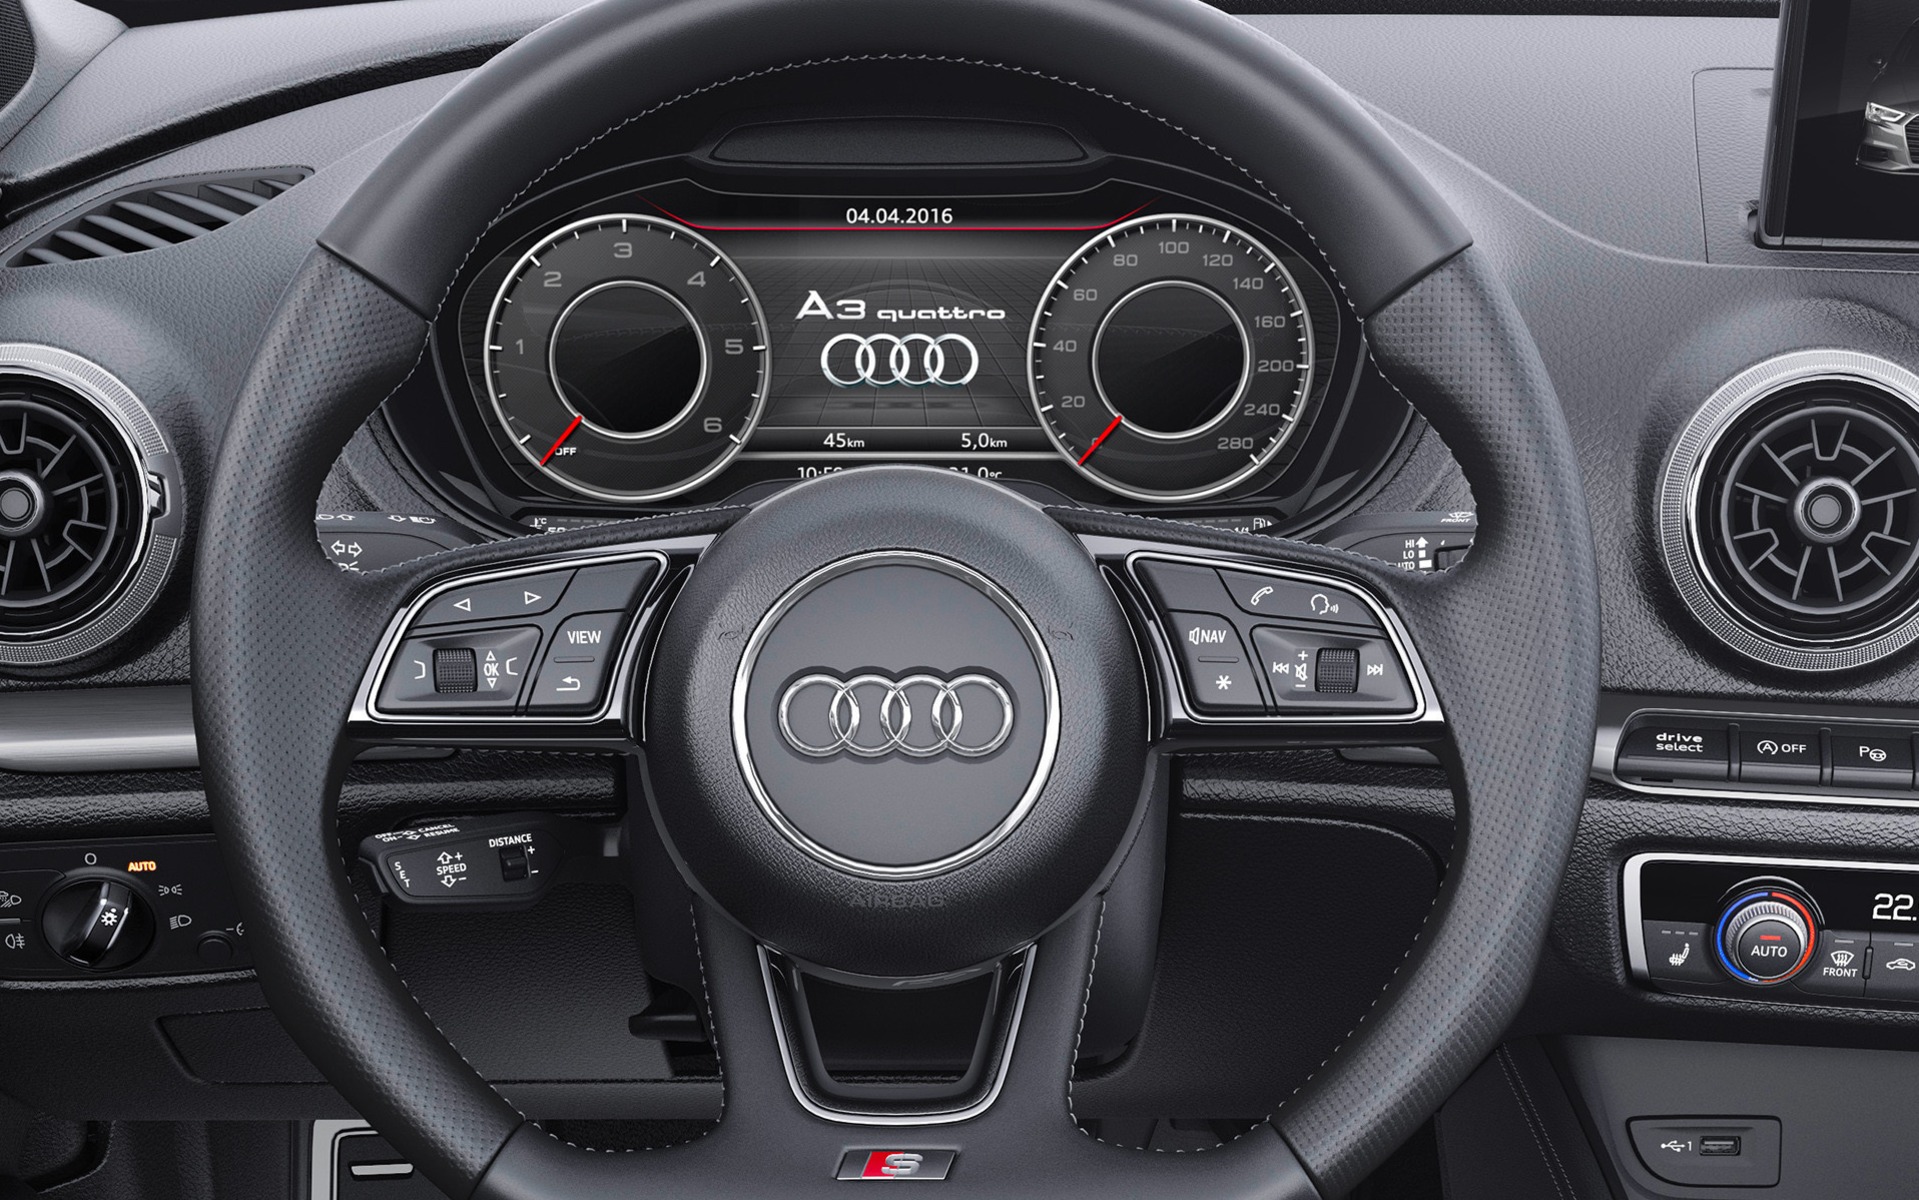 One of the Audi virtual cockpit’s numerous screens.